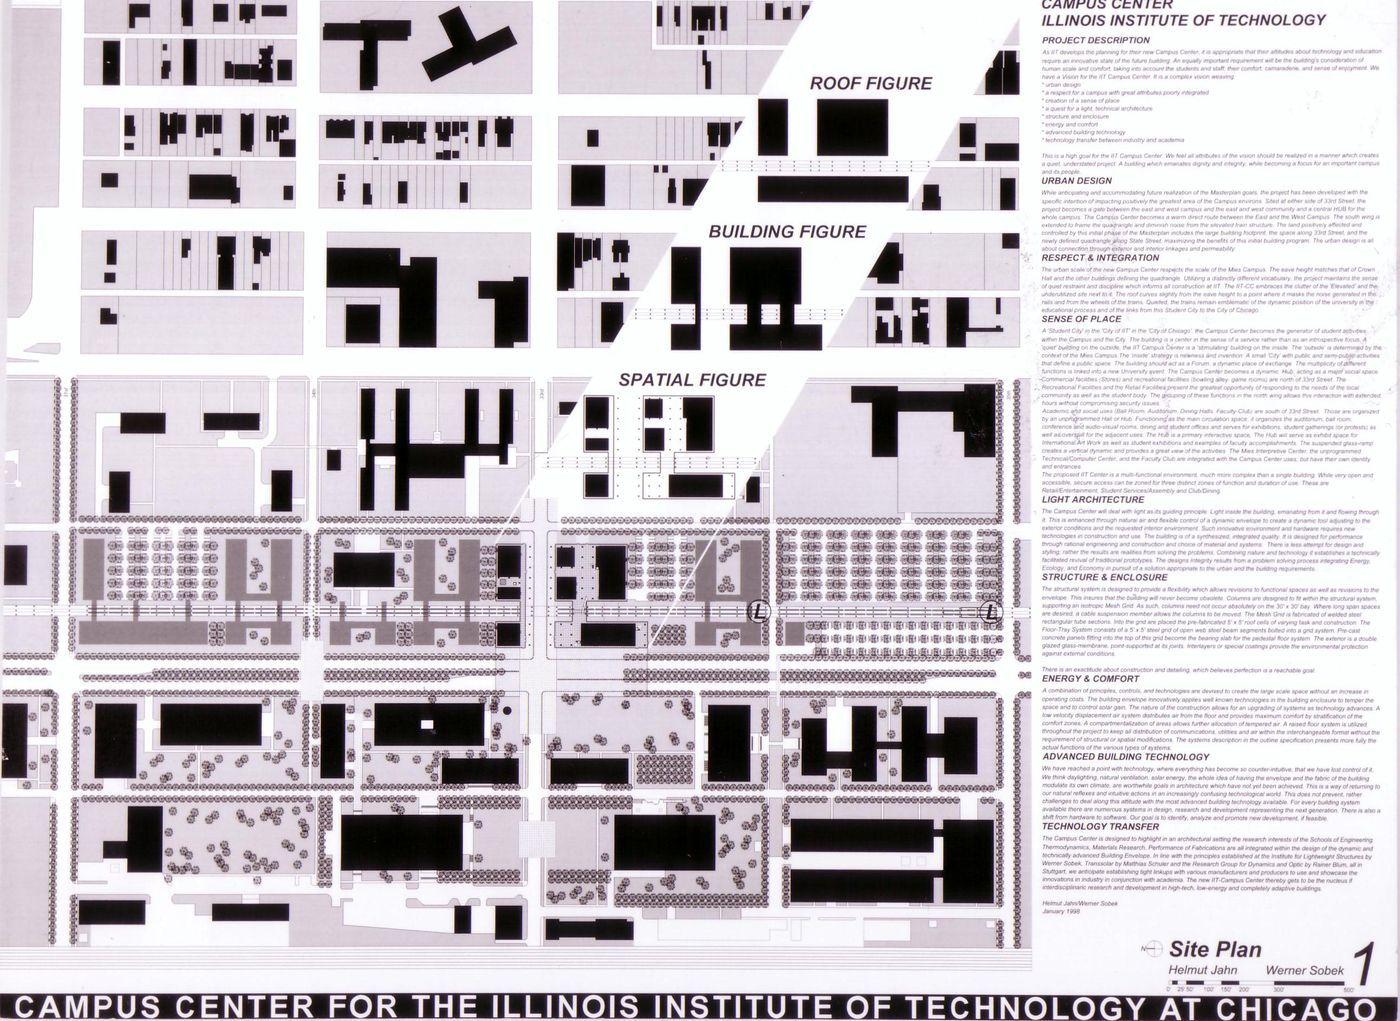 Site plan and project description, submission to the Richard H. Driehaus Foundation International Design Competition for a new campus center (1997-98), Illinois Institute of Technology, Chicago, Illinois